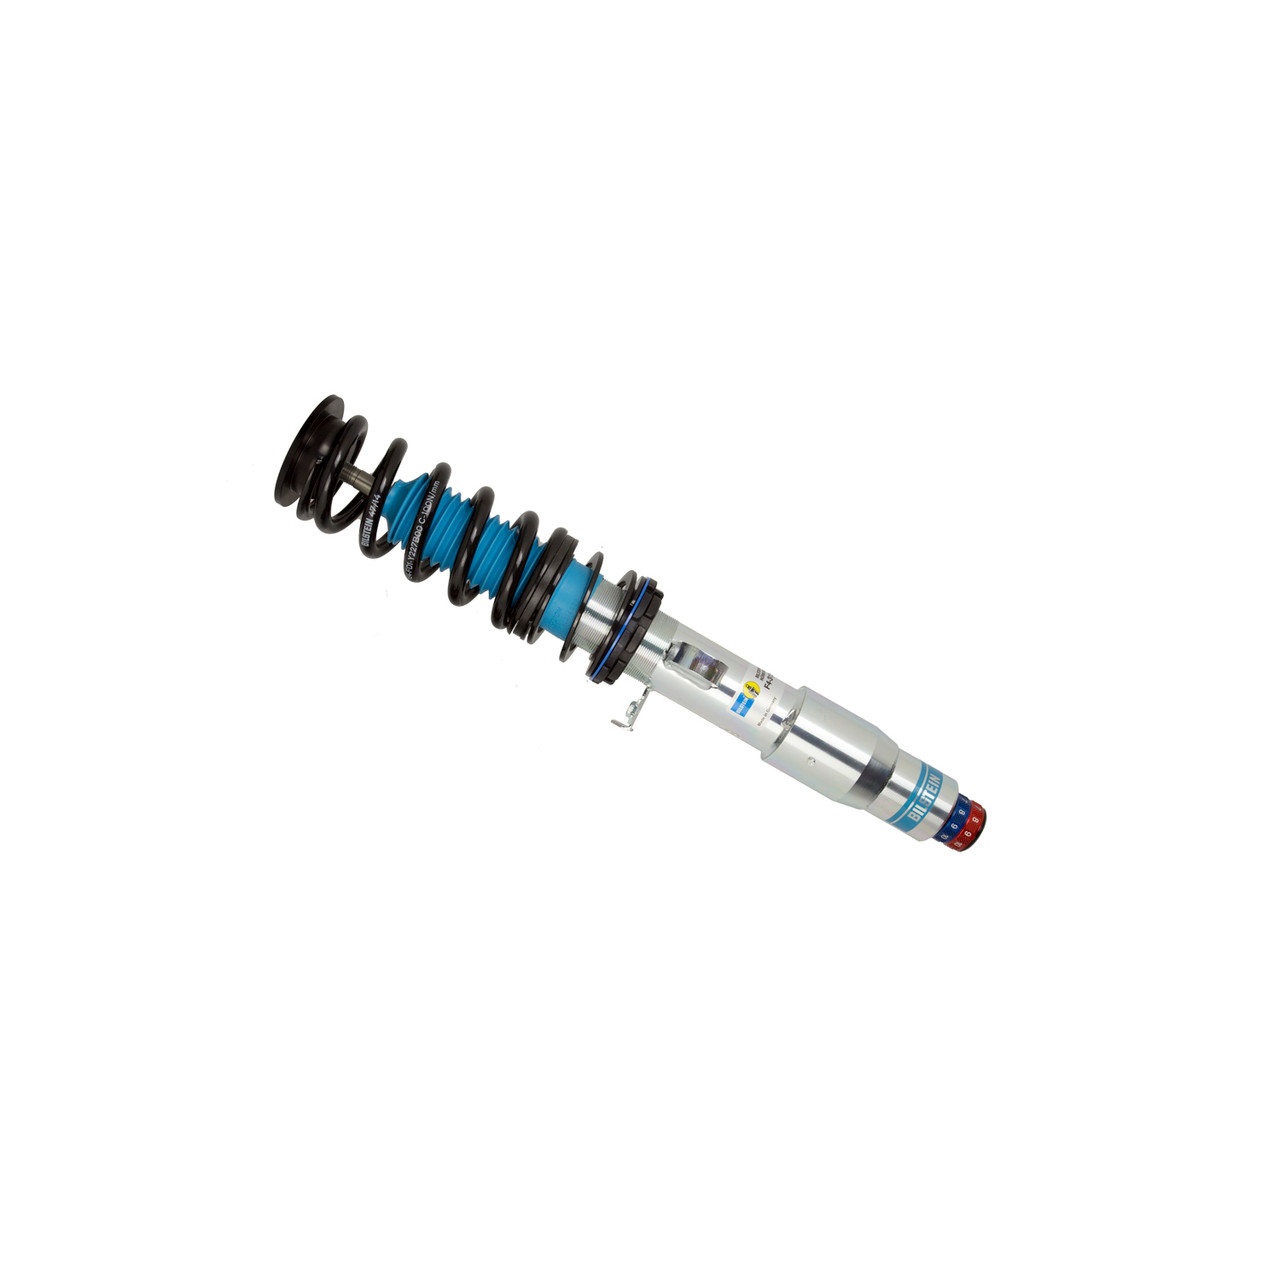 Bilstein Clubsport Coilovers for F80 M3, F82/F83 M4 & F87 M2